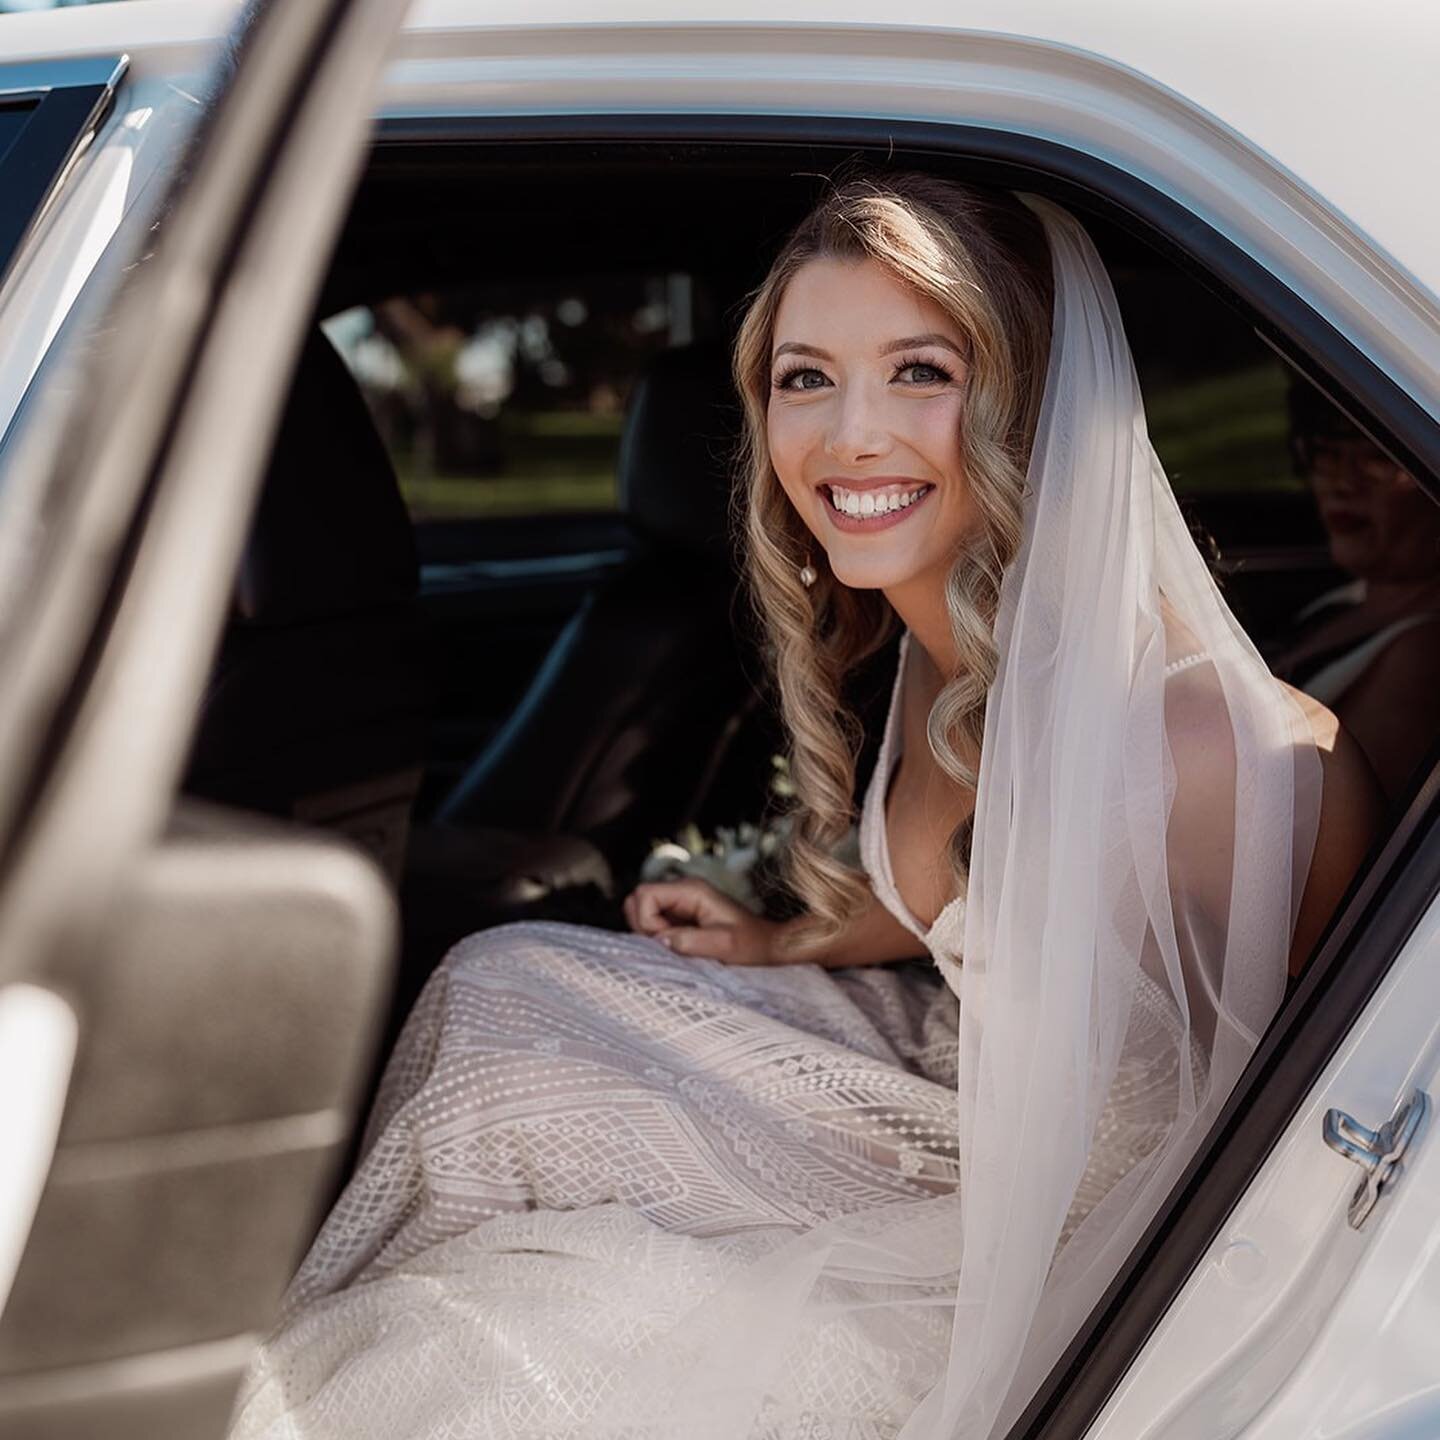 Stunning shots of our gorgeous boho bride. 
Visit our website today to enquire about your date with our talented team of bridal specialists. Link in bio 

#weddingmakeup#bohobride#bridalmakeup#sydneyweddings#sydneymakeup#bridalglam#australia